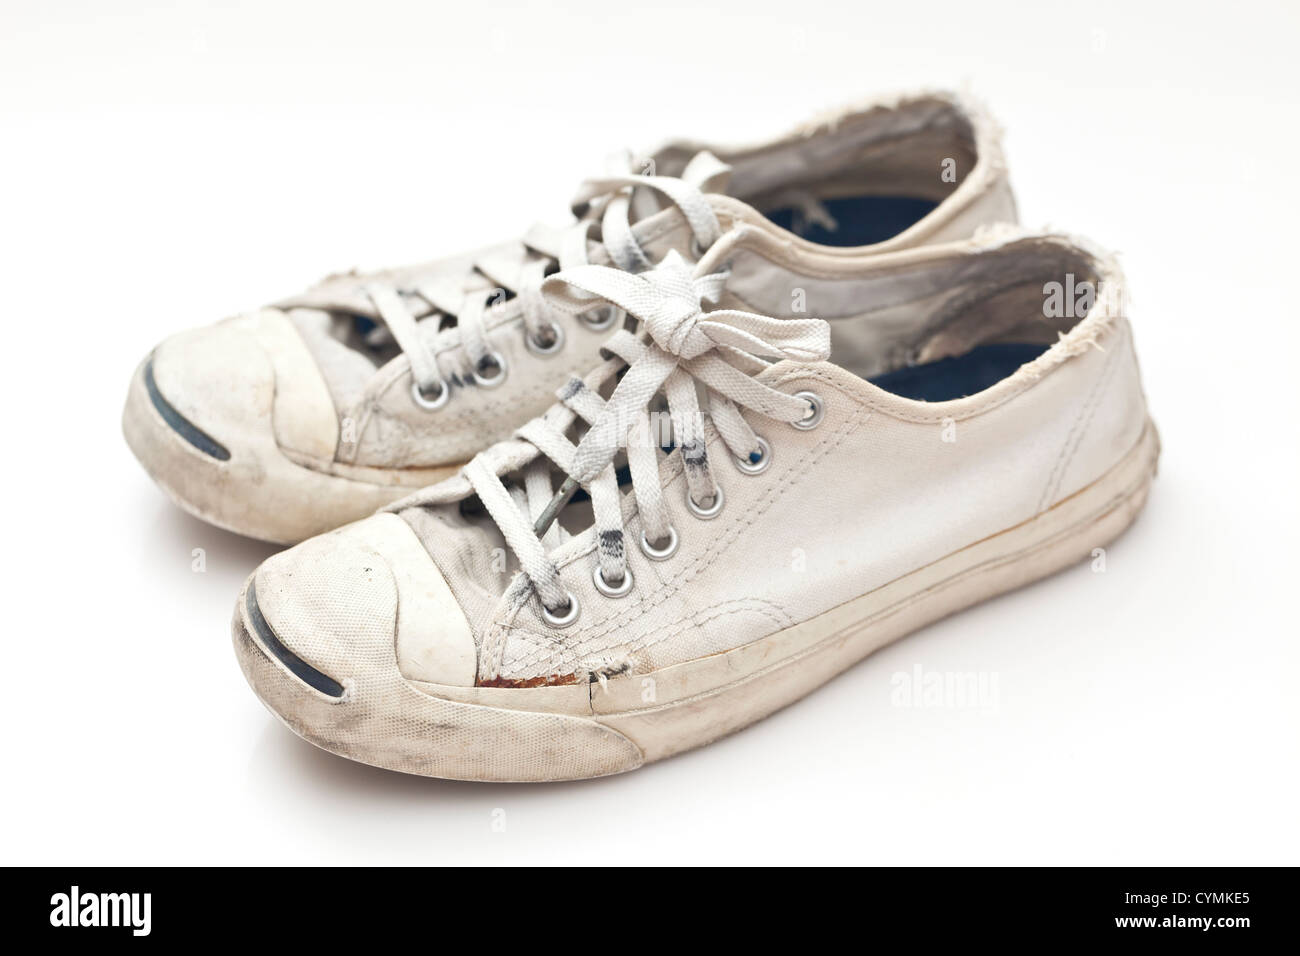 Old sport shoes on white background Stock Photo - Alamy